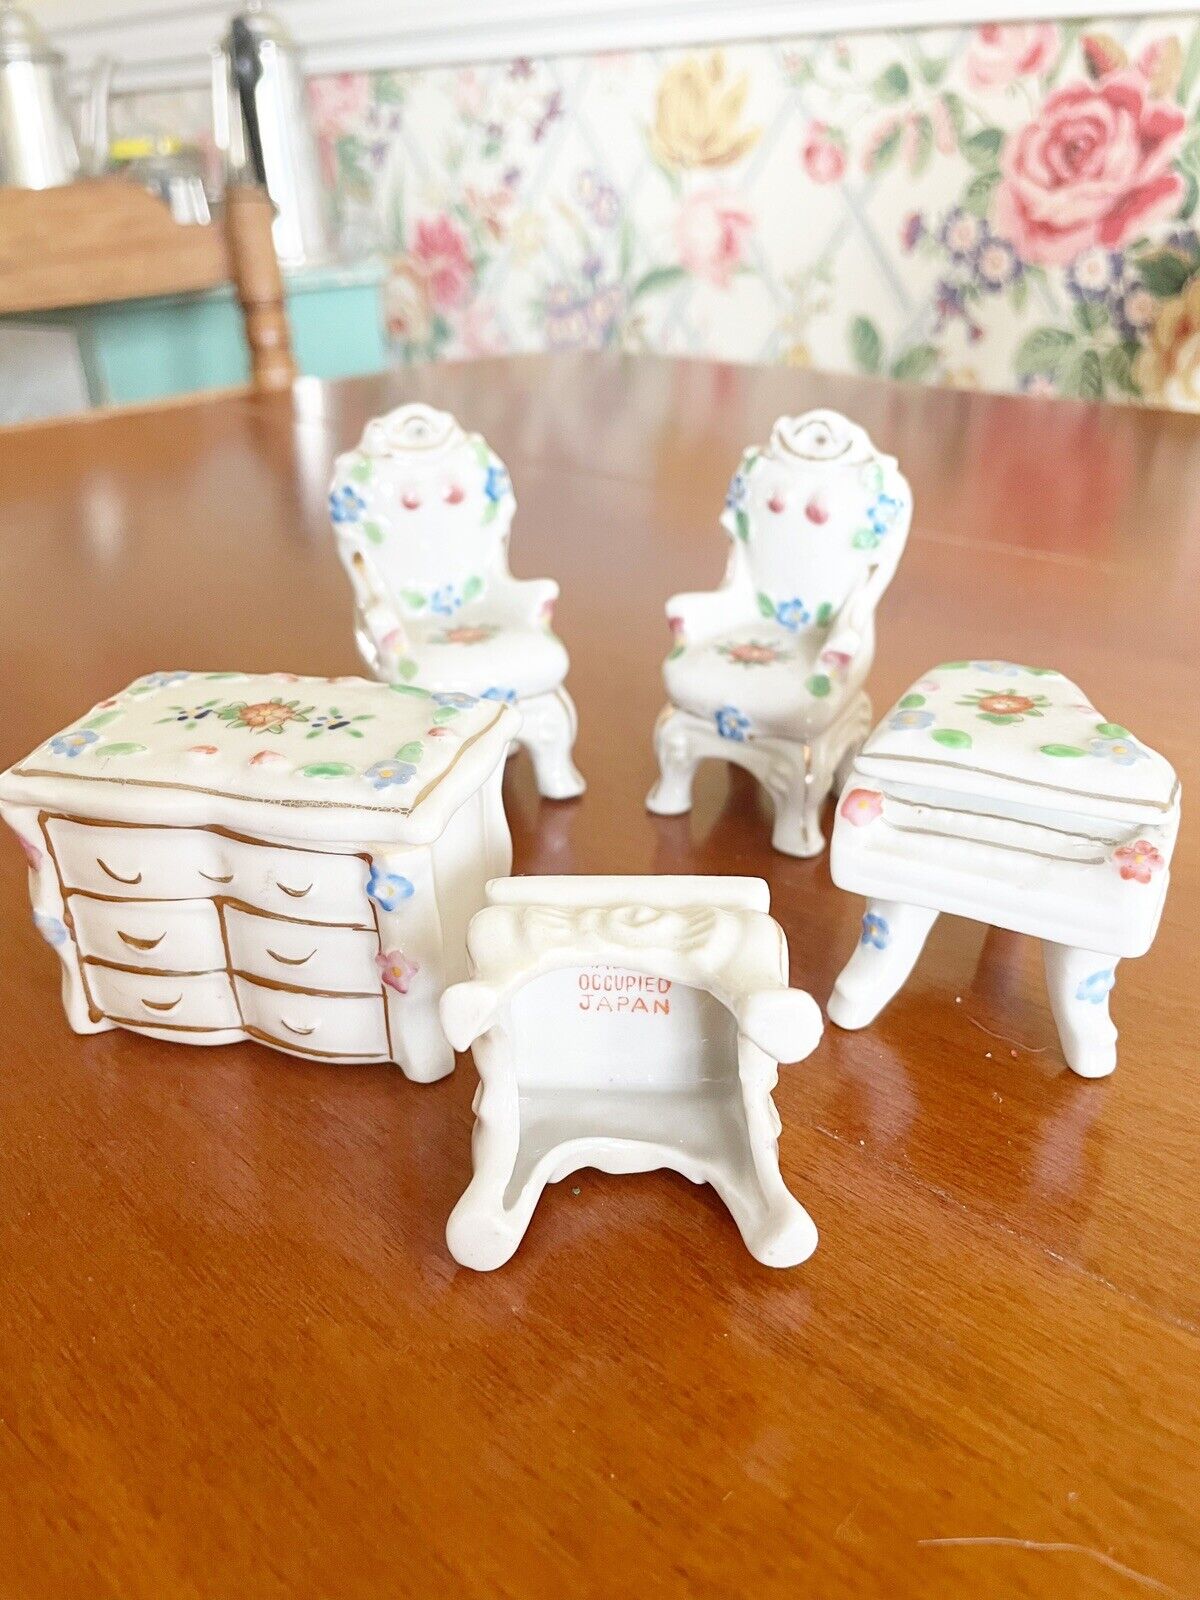 Vintage Miniature 5 Piece Doll House Furniture Set Piano Chest Occupied Japan